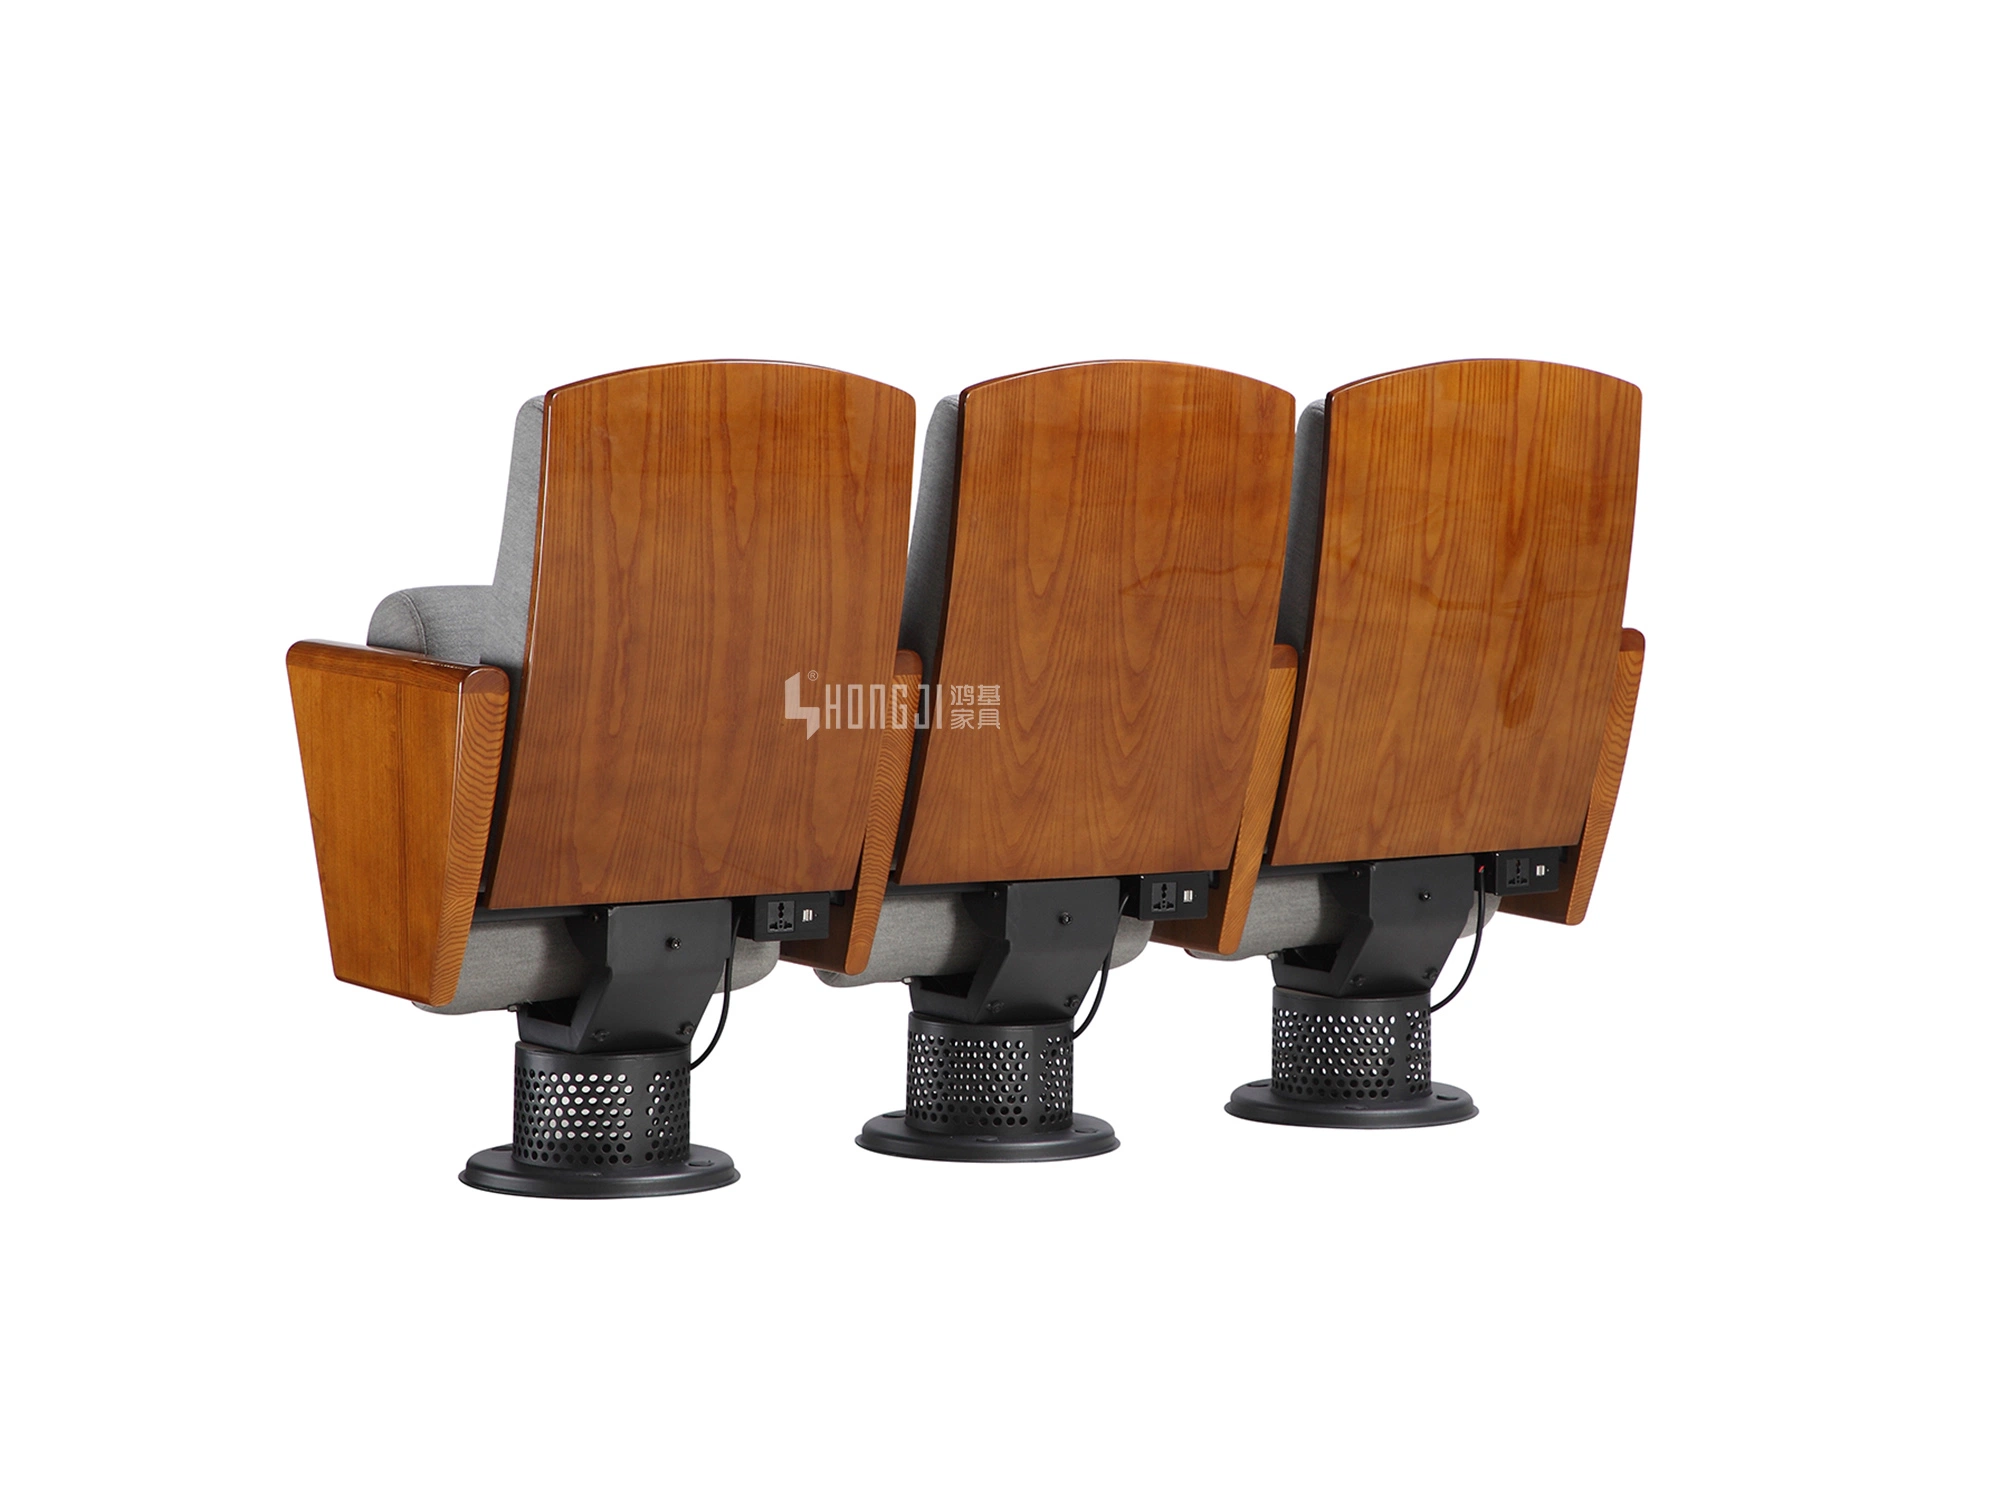 Media Room Lecture Hall Lecture Theater Public Conference Church Theater Auditorium Furniture